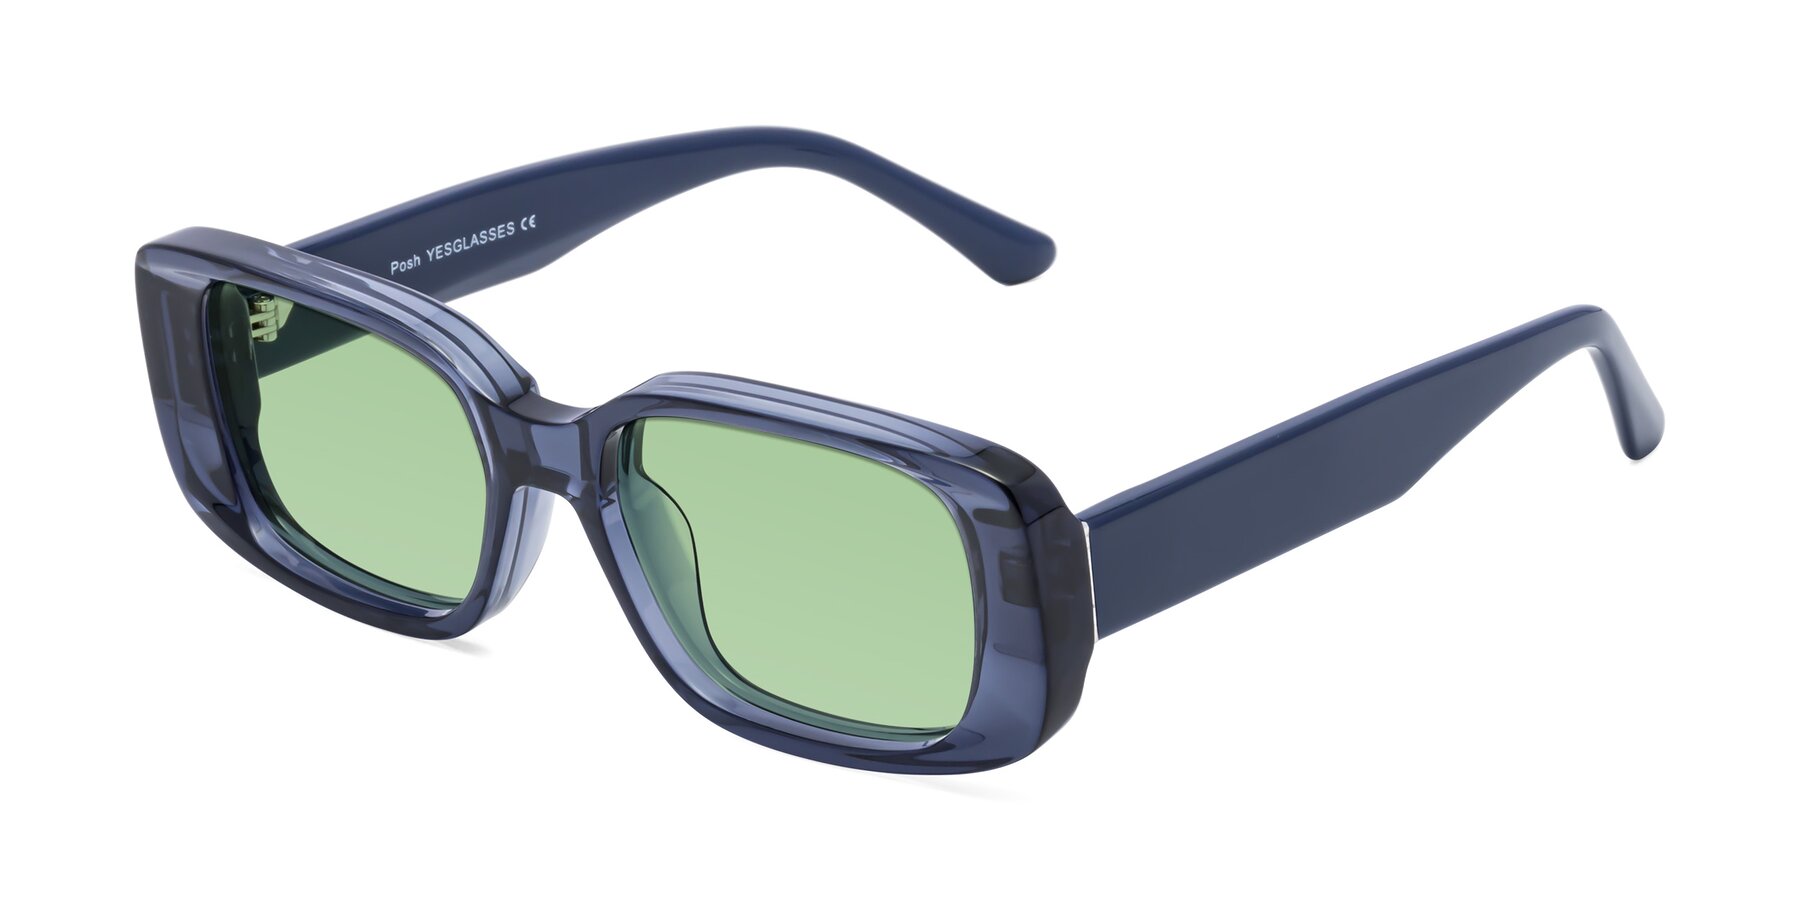 Angle of Posh in Translucent Blue with Medium Green Tinted Lenses